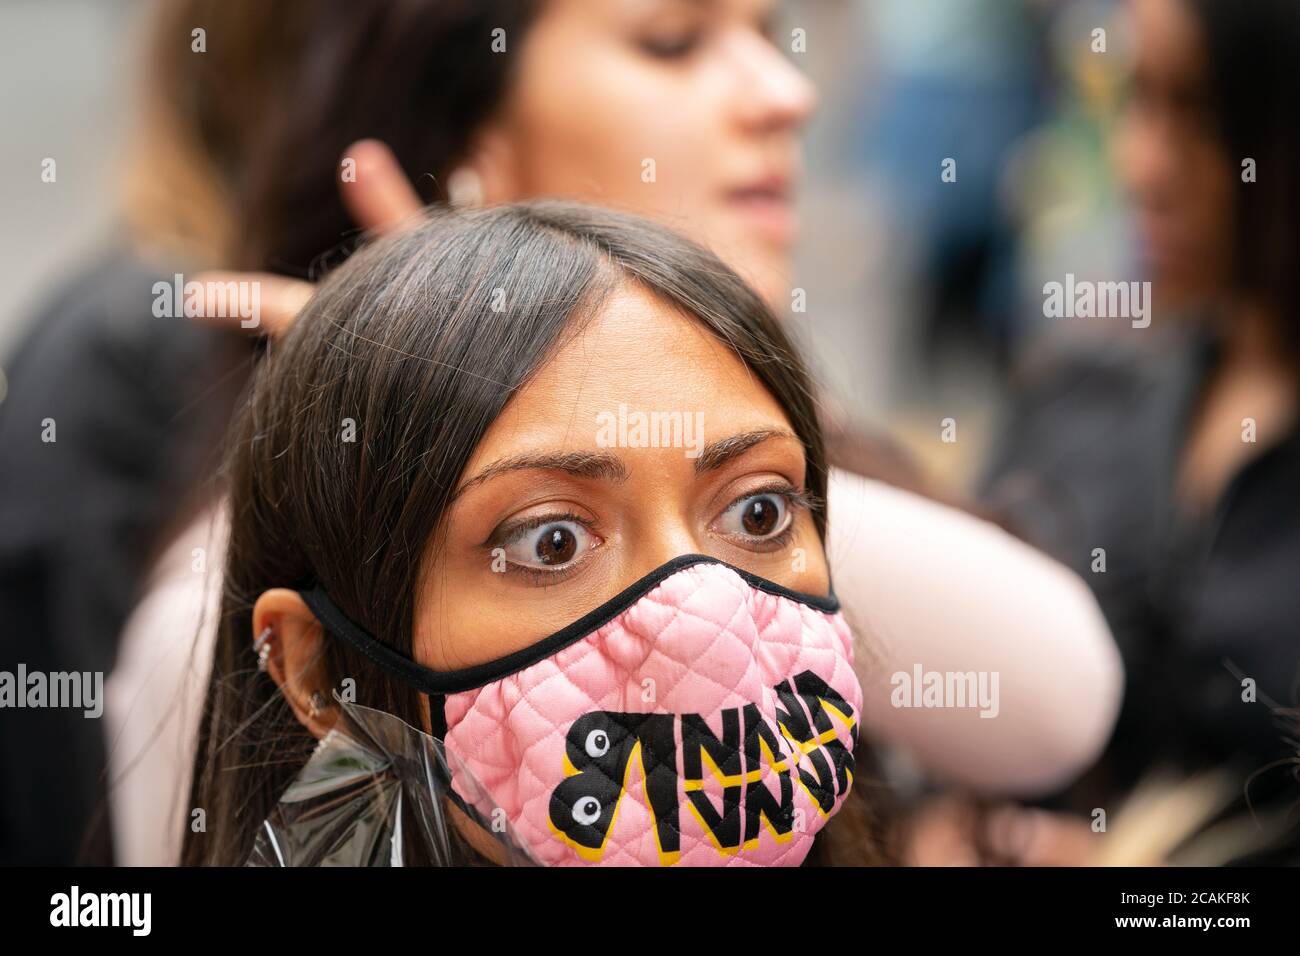 LONDON, ENGLAND - JULY 28, 2020: Beautiful female Johnny Depp fan outside the High Court wearing a face mask during his Court case struck with surpris Stock Photo